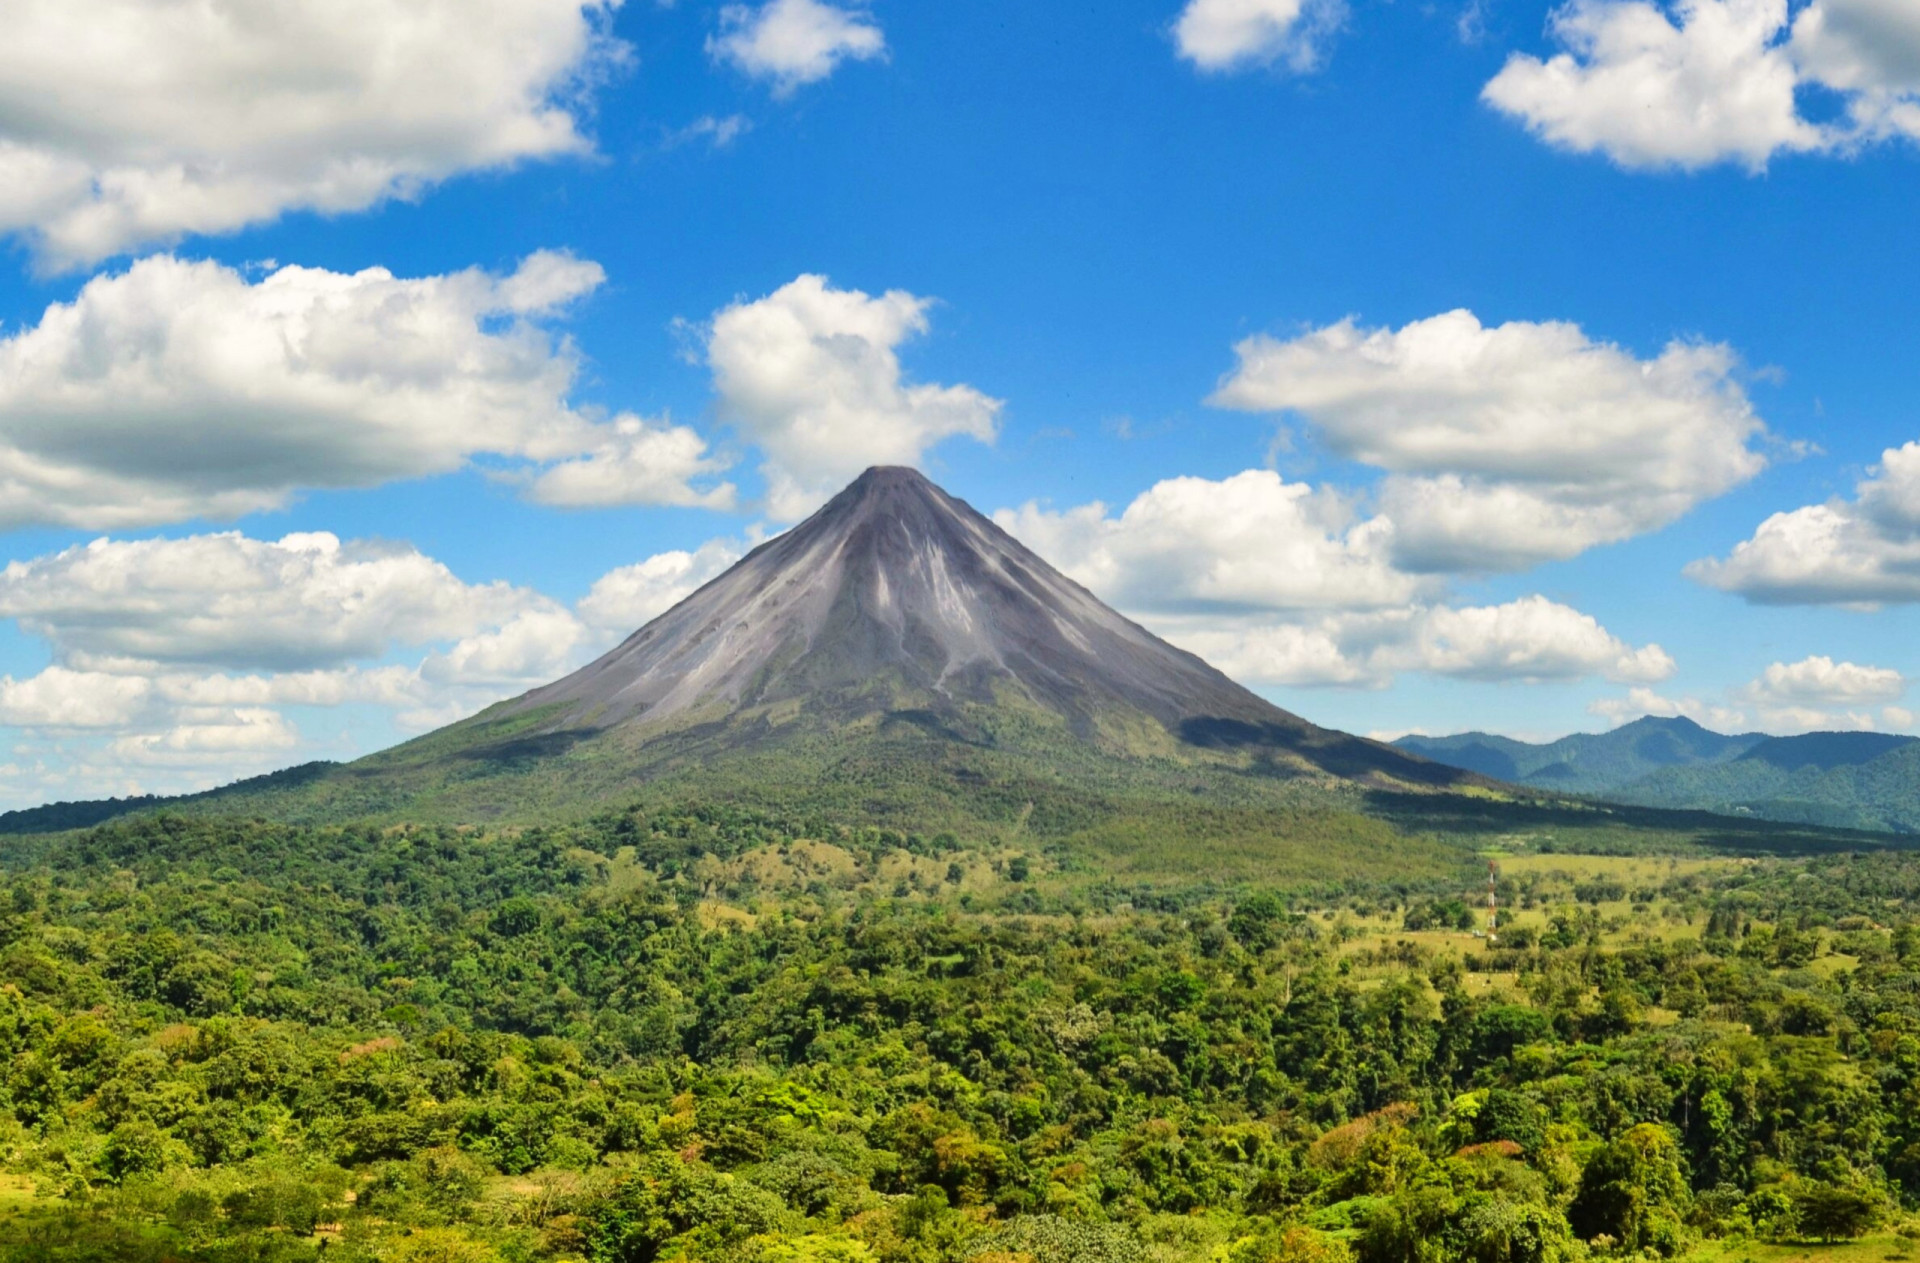 <p>A famous Costa Rica landmark, Arenal Volcano is located 2.5 hours from San José in the northwestern part of the country. A 3-mi (4.5-km) hike through forest and over lava beds will bring you to an observation tower for the best photographs of this now-dormant natural wonder.</p><p>You may also like:<a href="https://www.starsinsider.com/n/452732?utm_source=msn.com&utm_medium=display&utm_campaign=referral_description&utm_content=627756en-en"> Biggest actor mistakes that were kept in the movie</a></p>